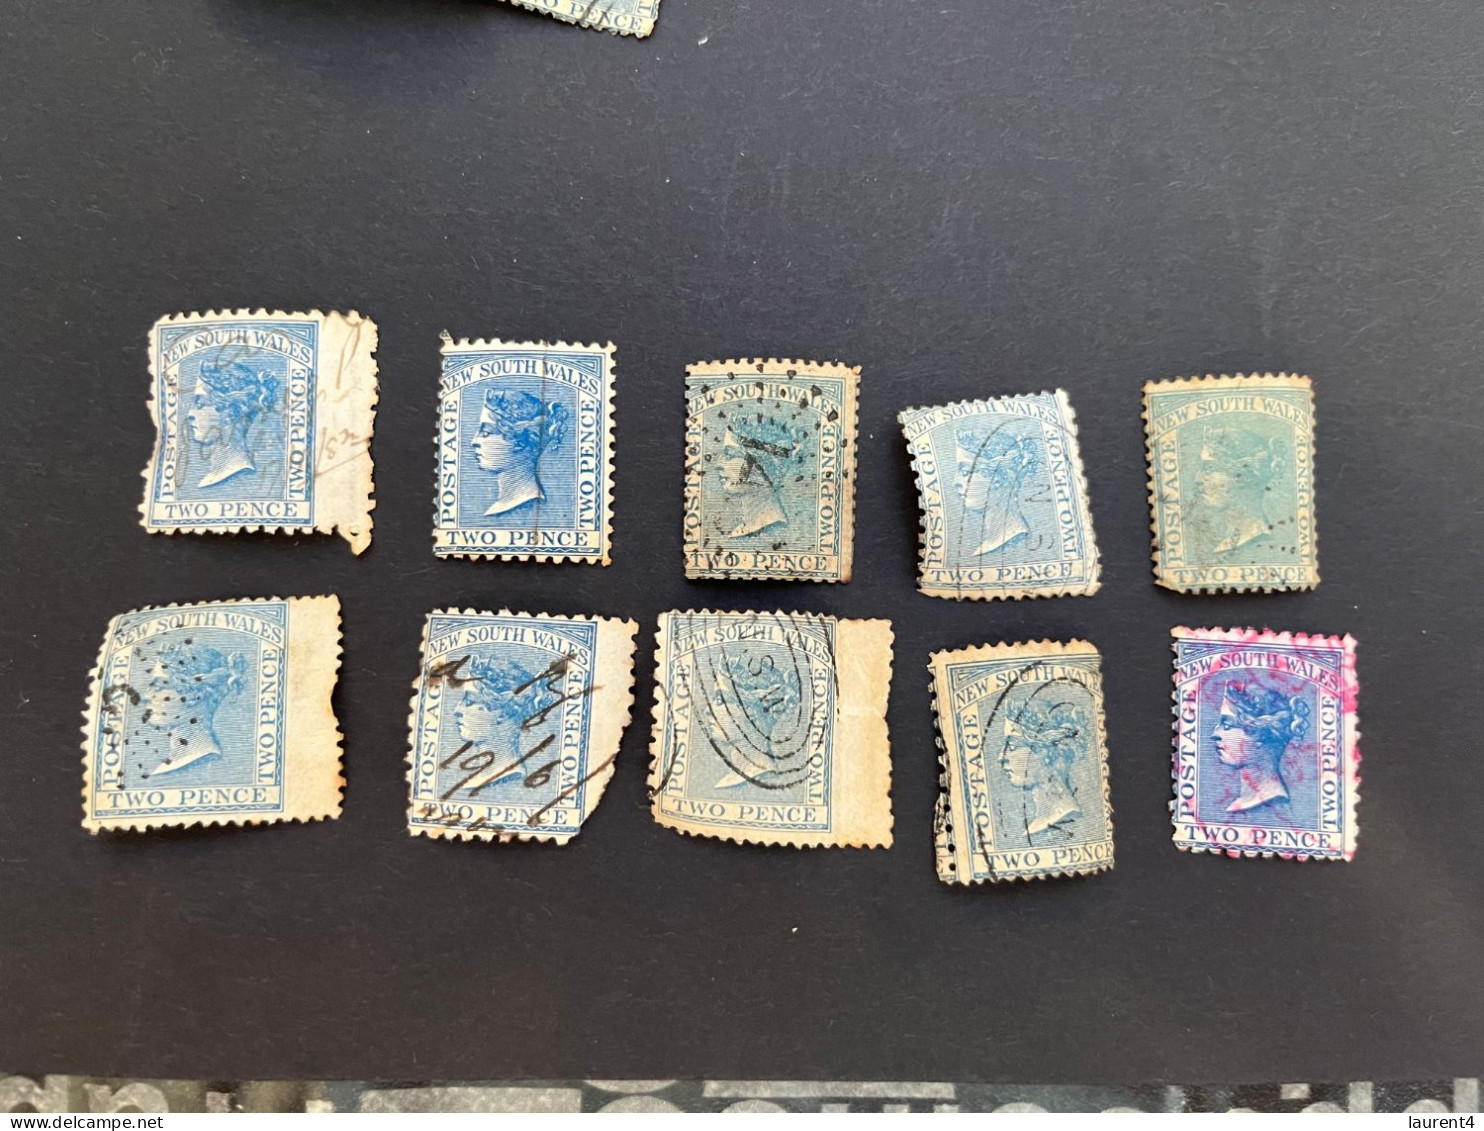 (stamps 7-5-2024) Very Old Australia Stamp - NSW 2 Pence X 10 Stamps - Gebruikt